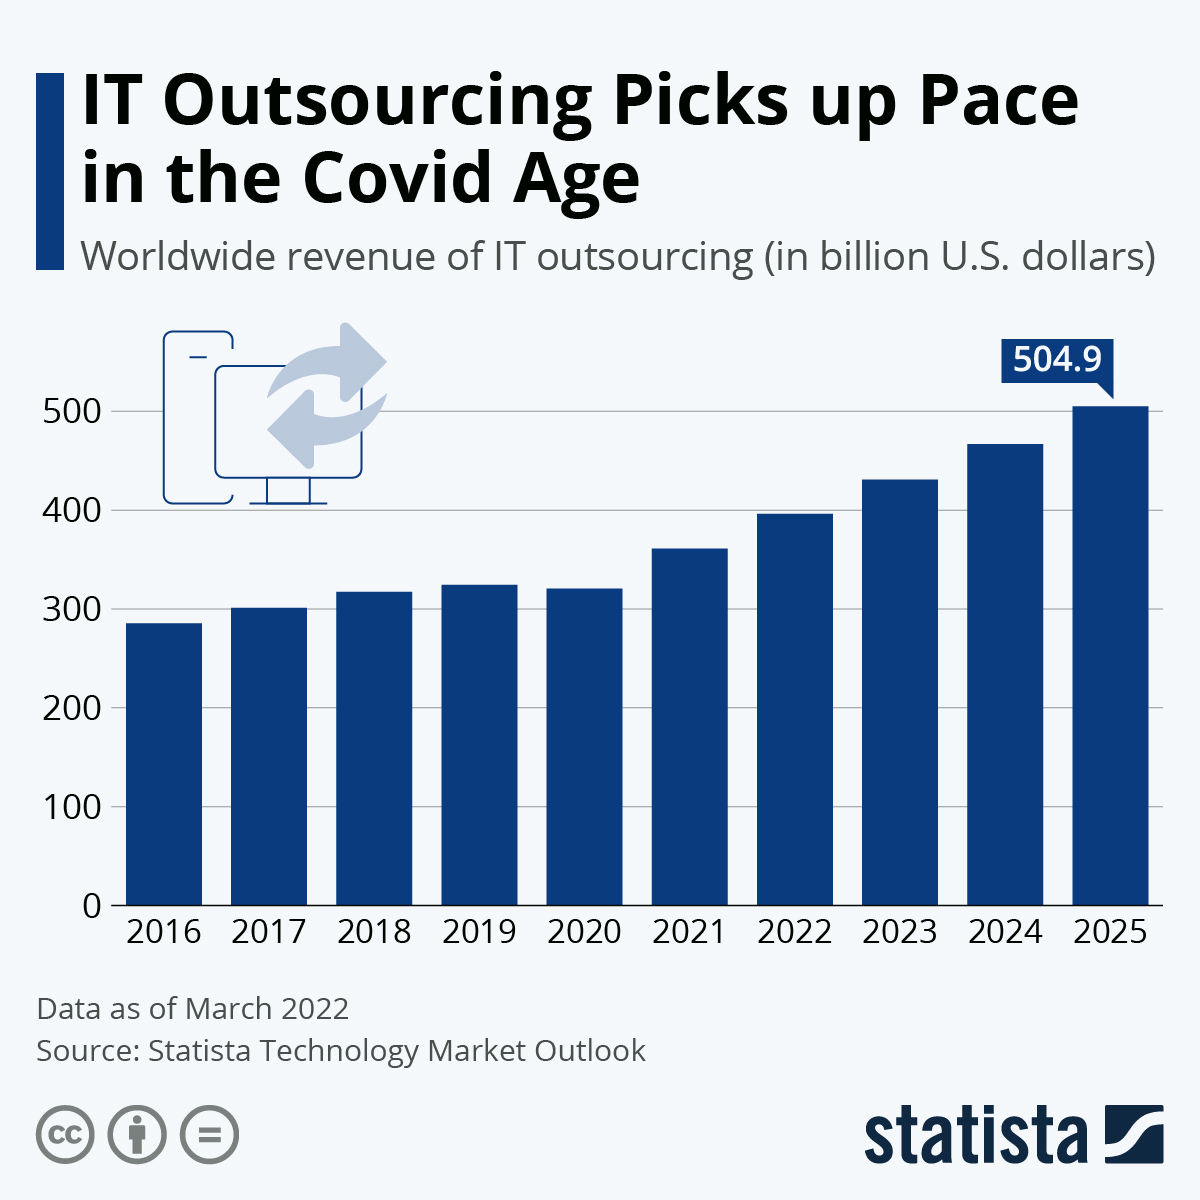 a statistics that shows a gradual growth of worldwide revenue of IT outsourcing from 2016 to 2025 year